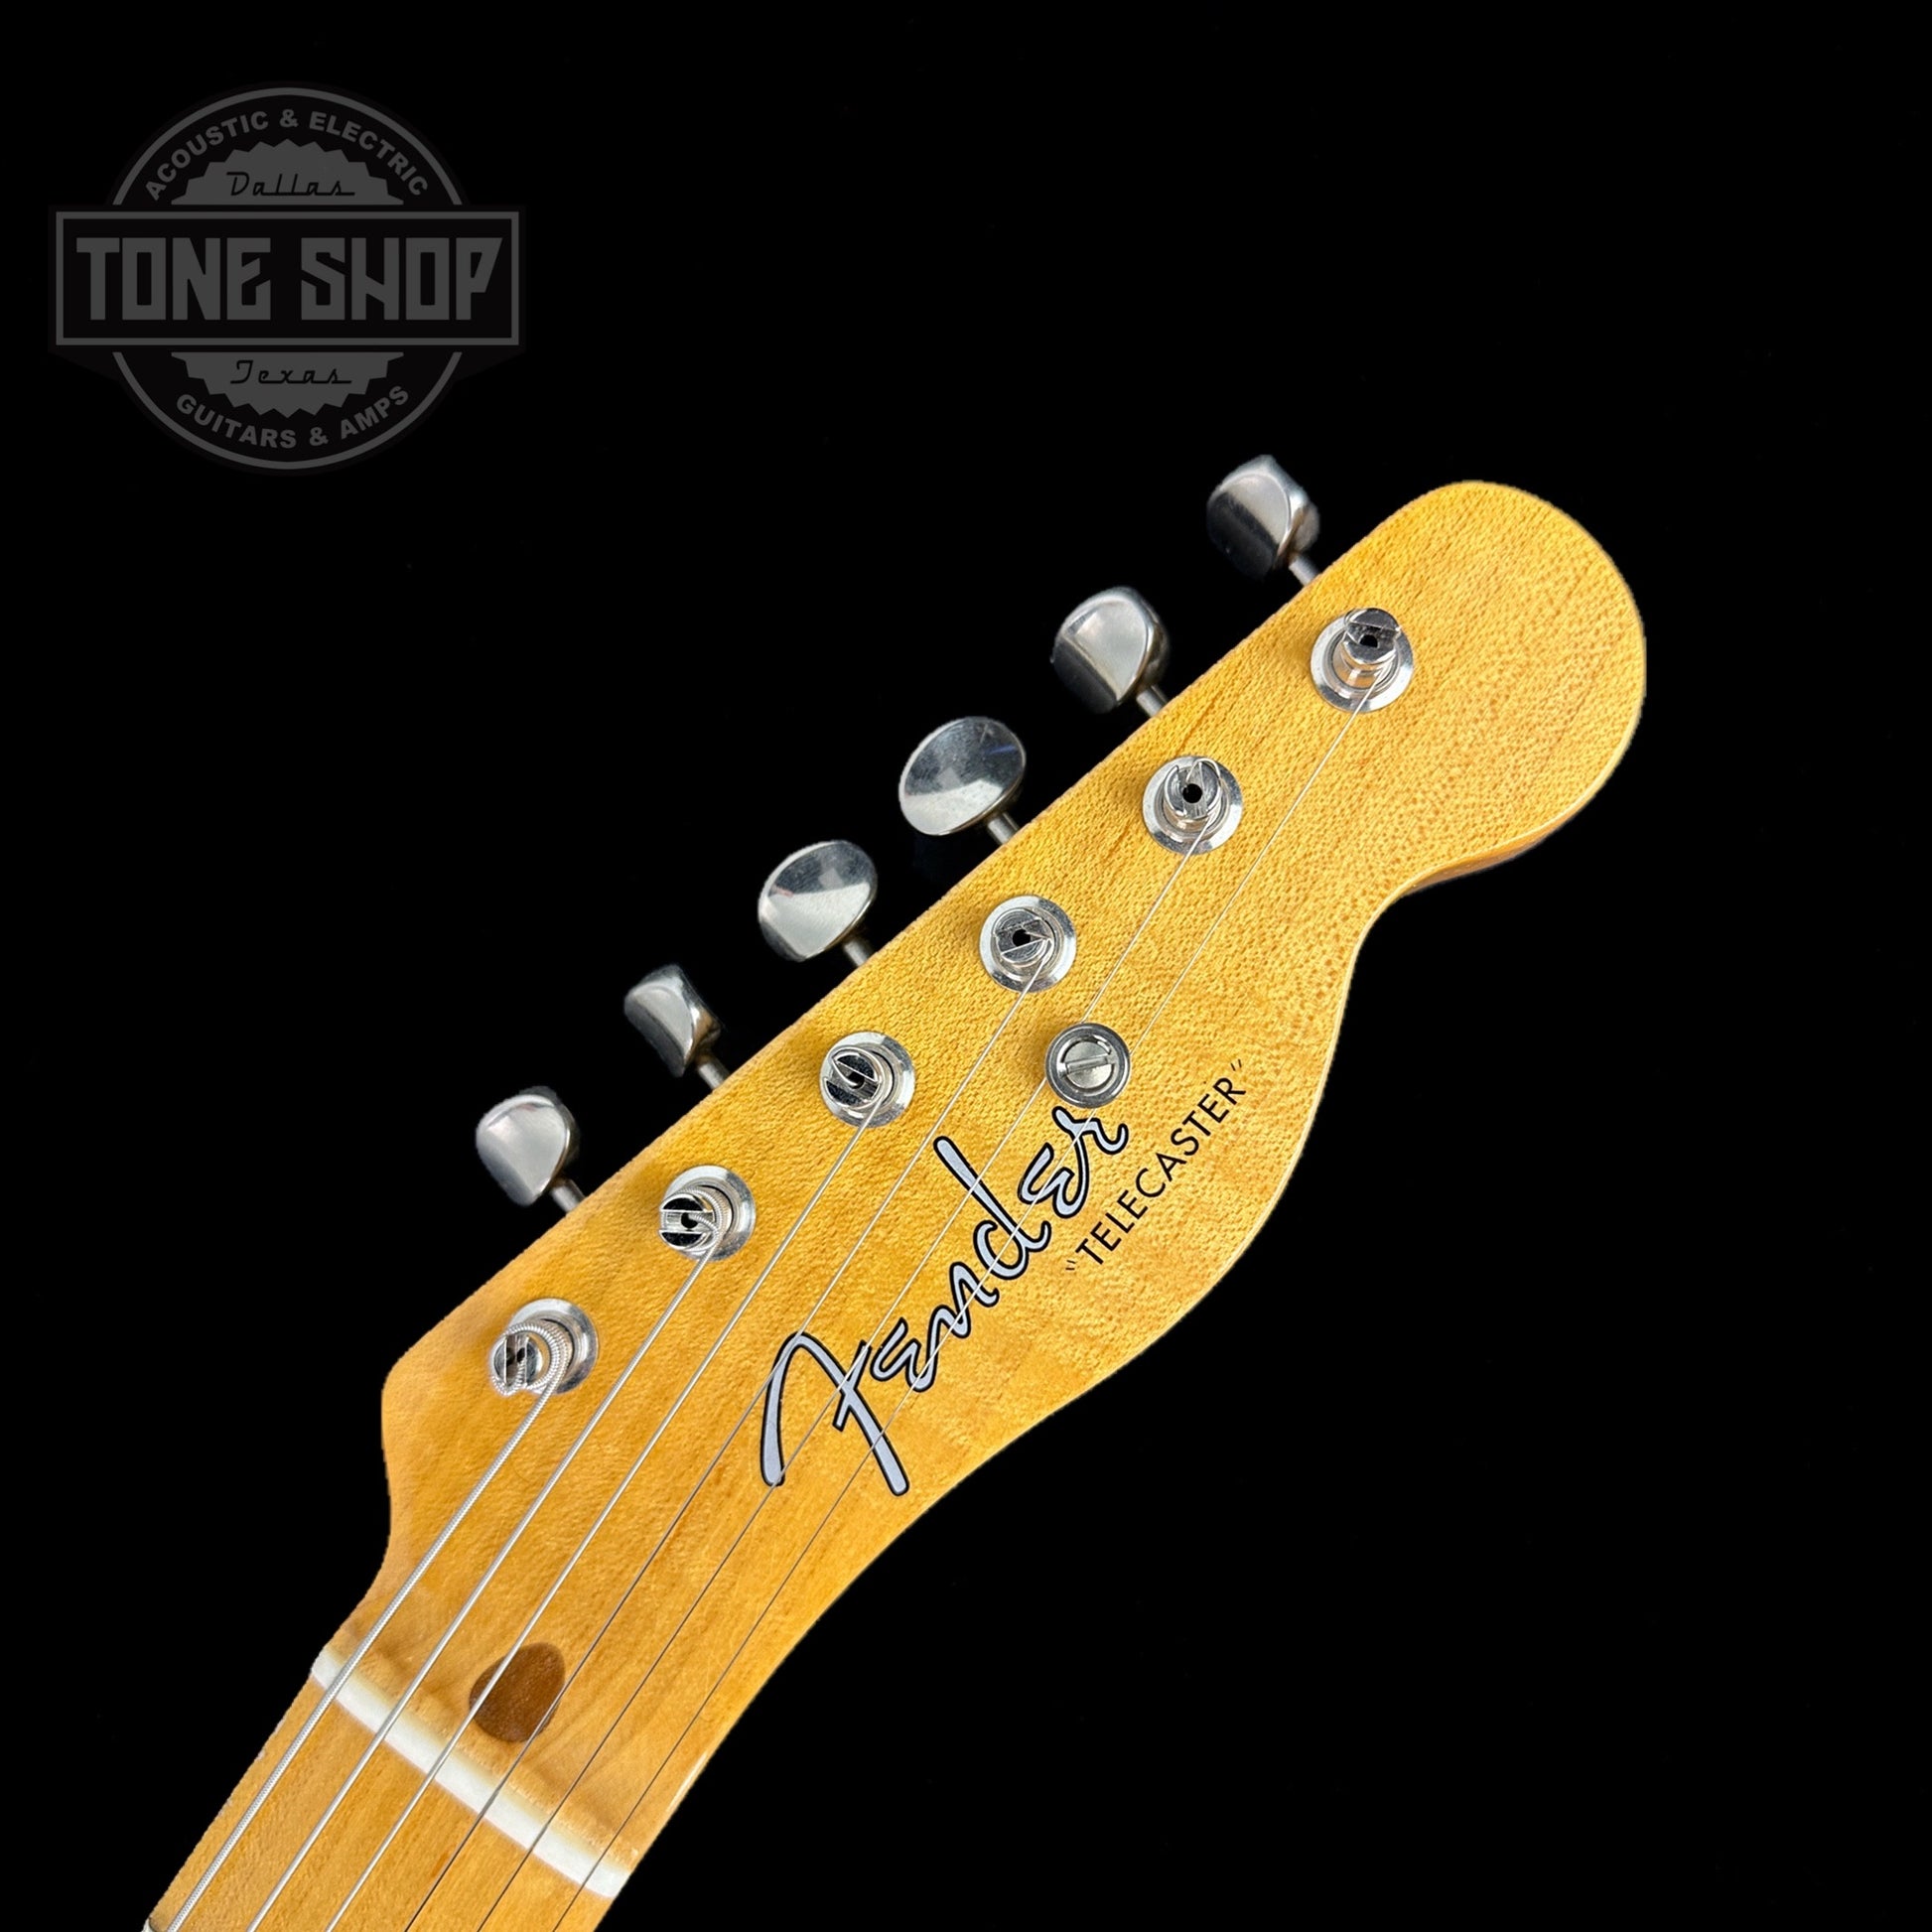 Fron of headstock of Used 2021 Fender Custom Shop '51 Tele Deluxe Closet Classic Nocaster Blonde.